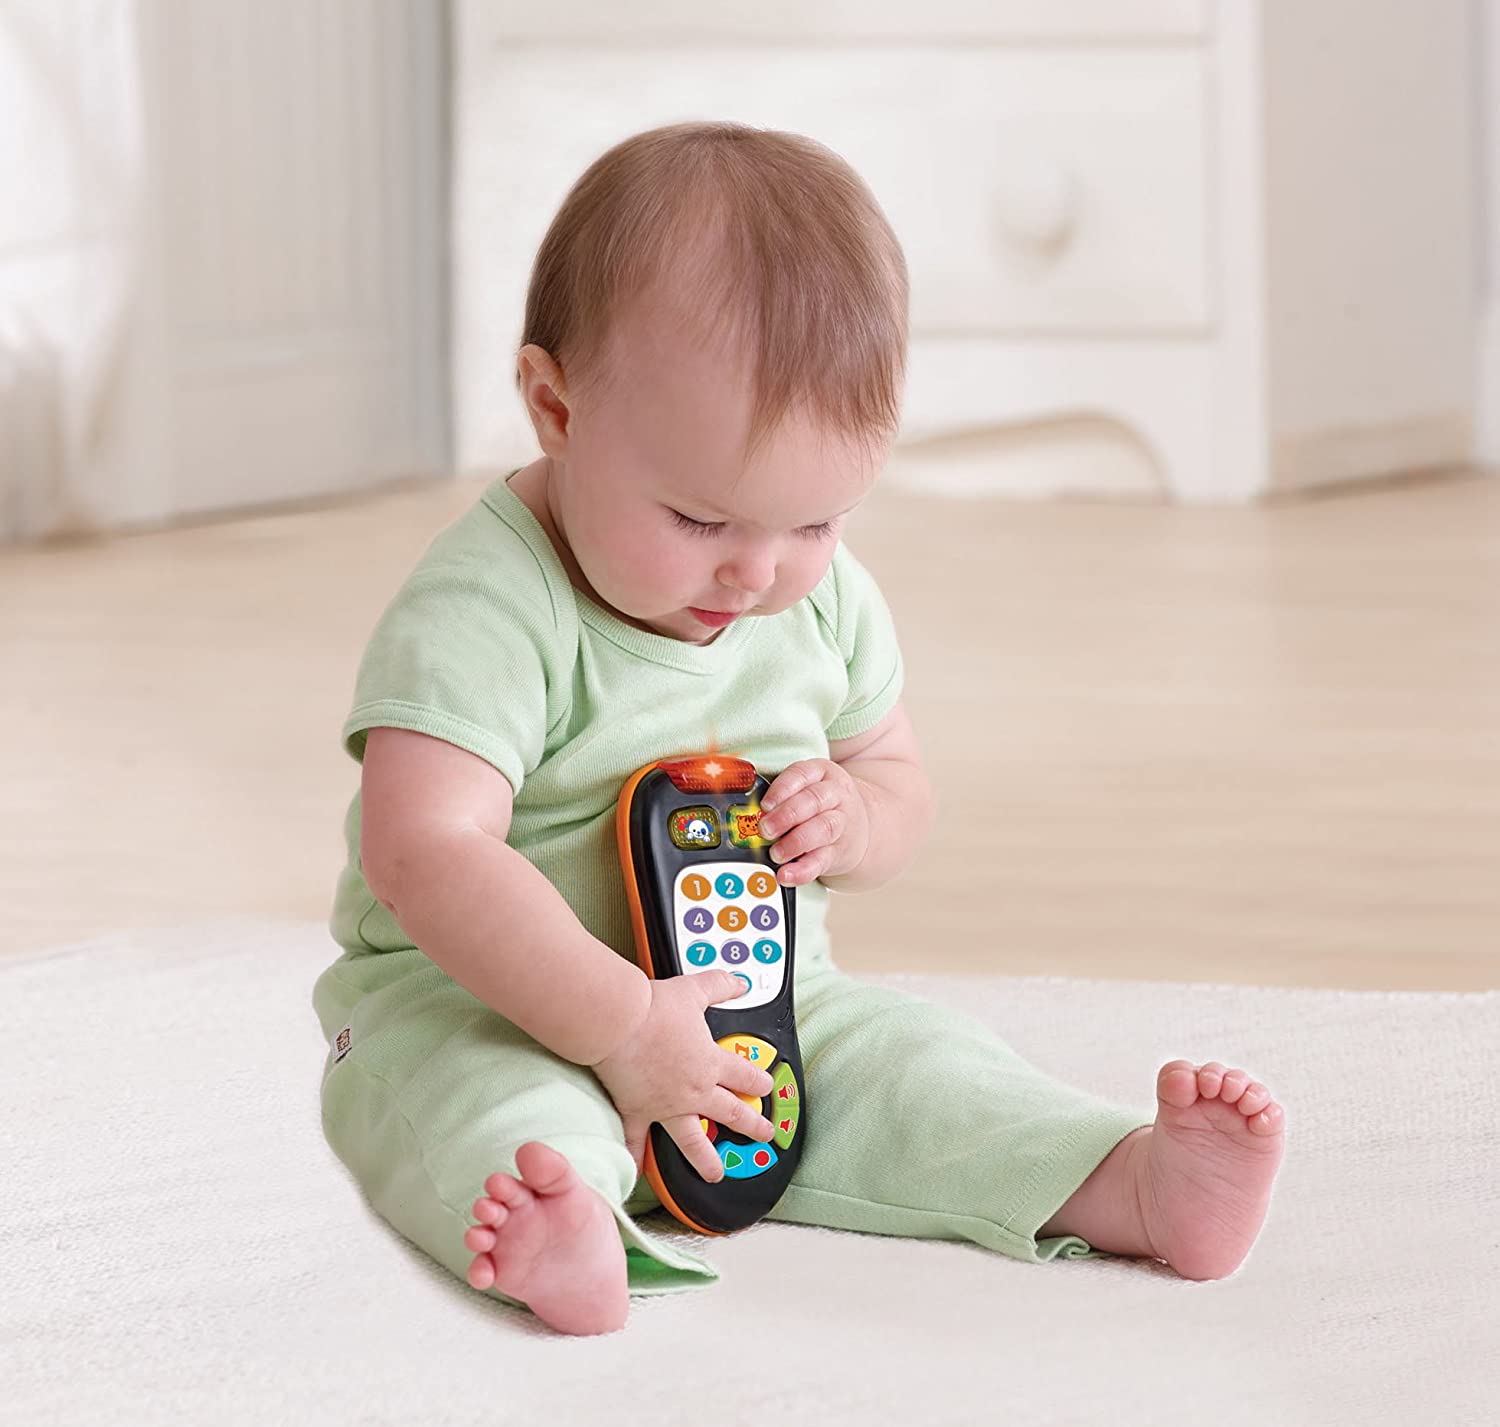 VTech Click and Count Remote, Black - for Ages 6 to 36 Months